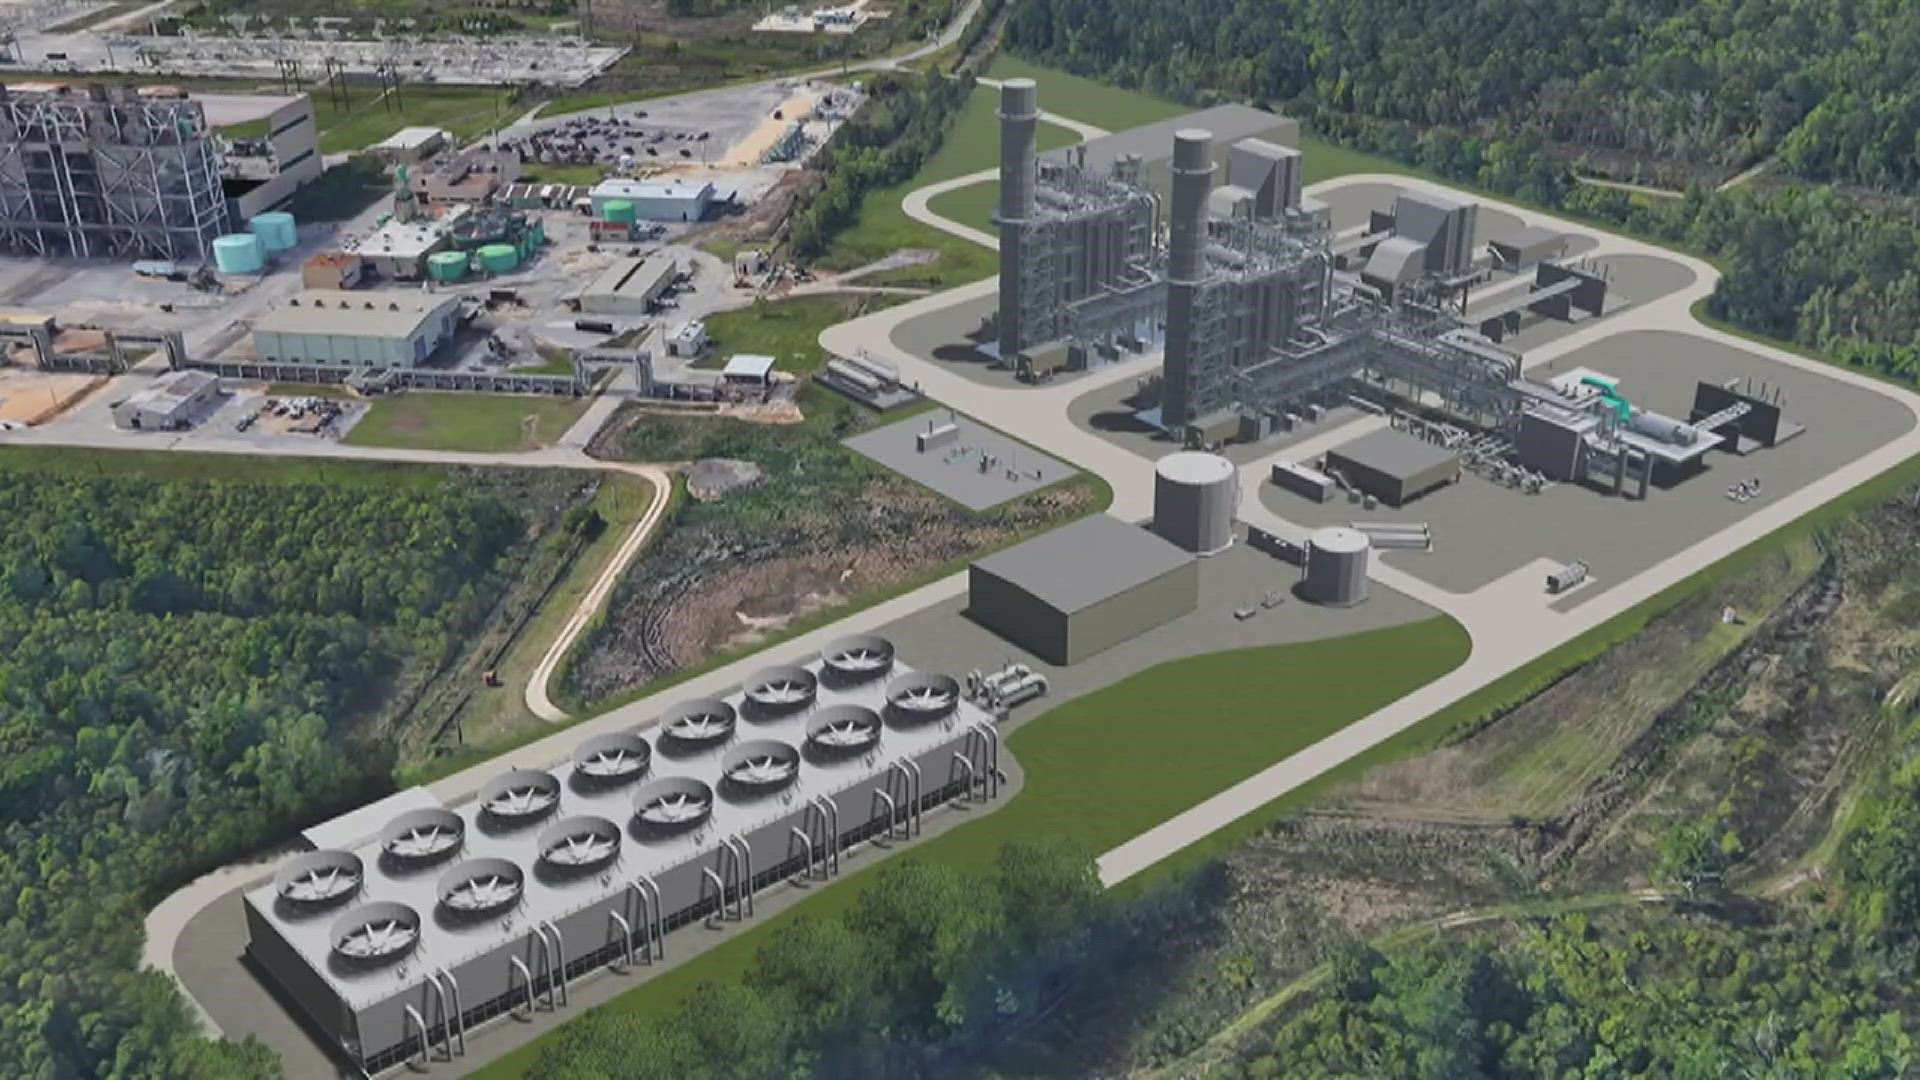 The company says the facility could power close to 230,000 homes and will be driven by both natural gas and hydrogen.